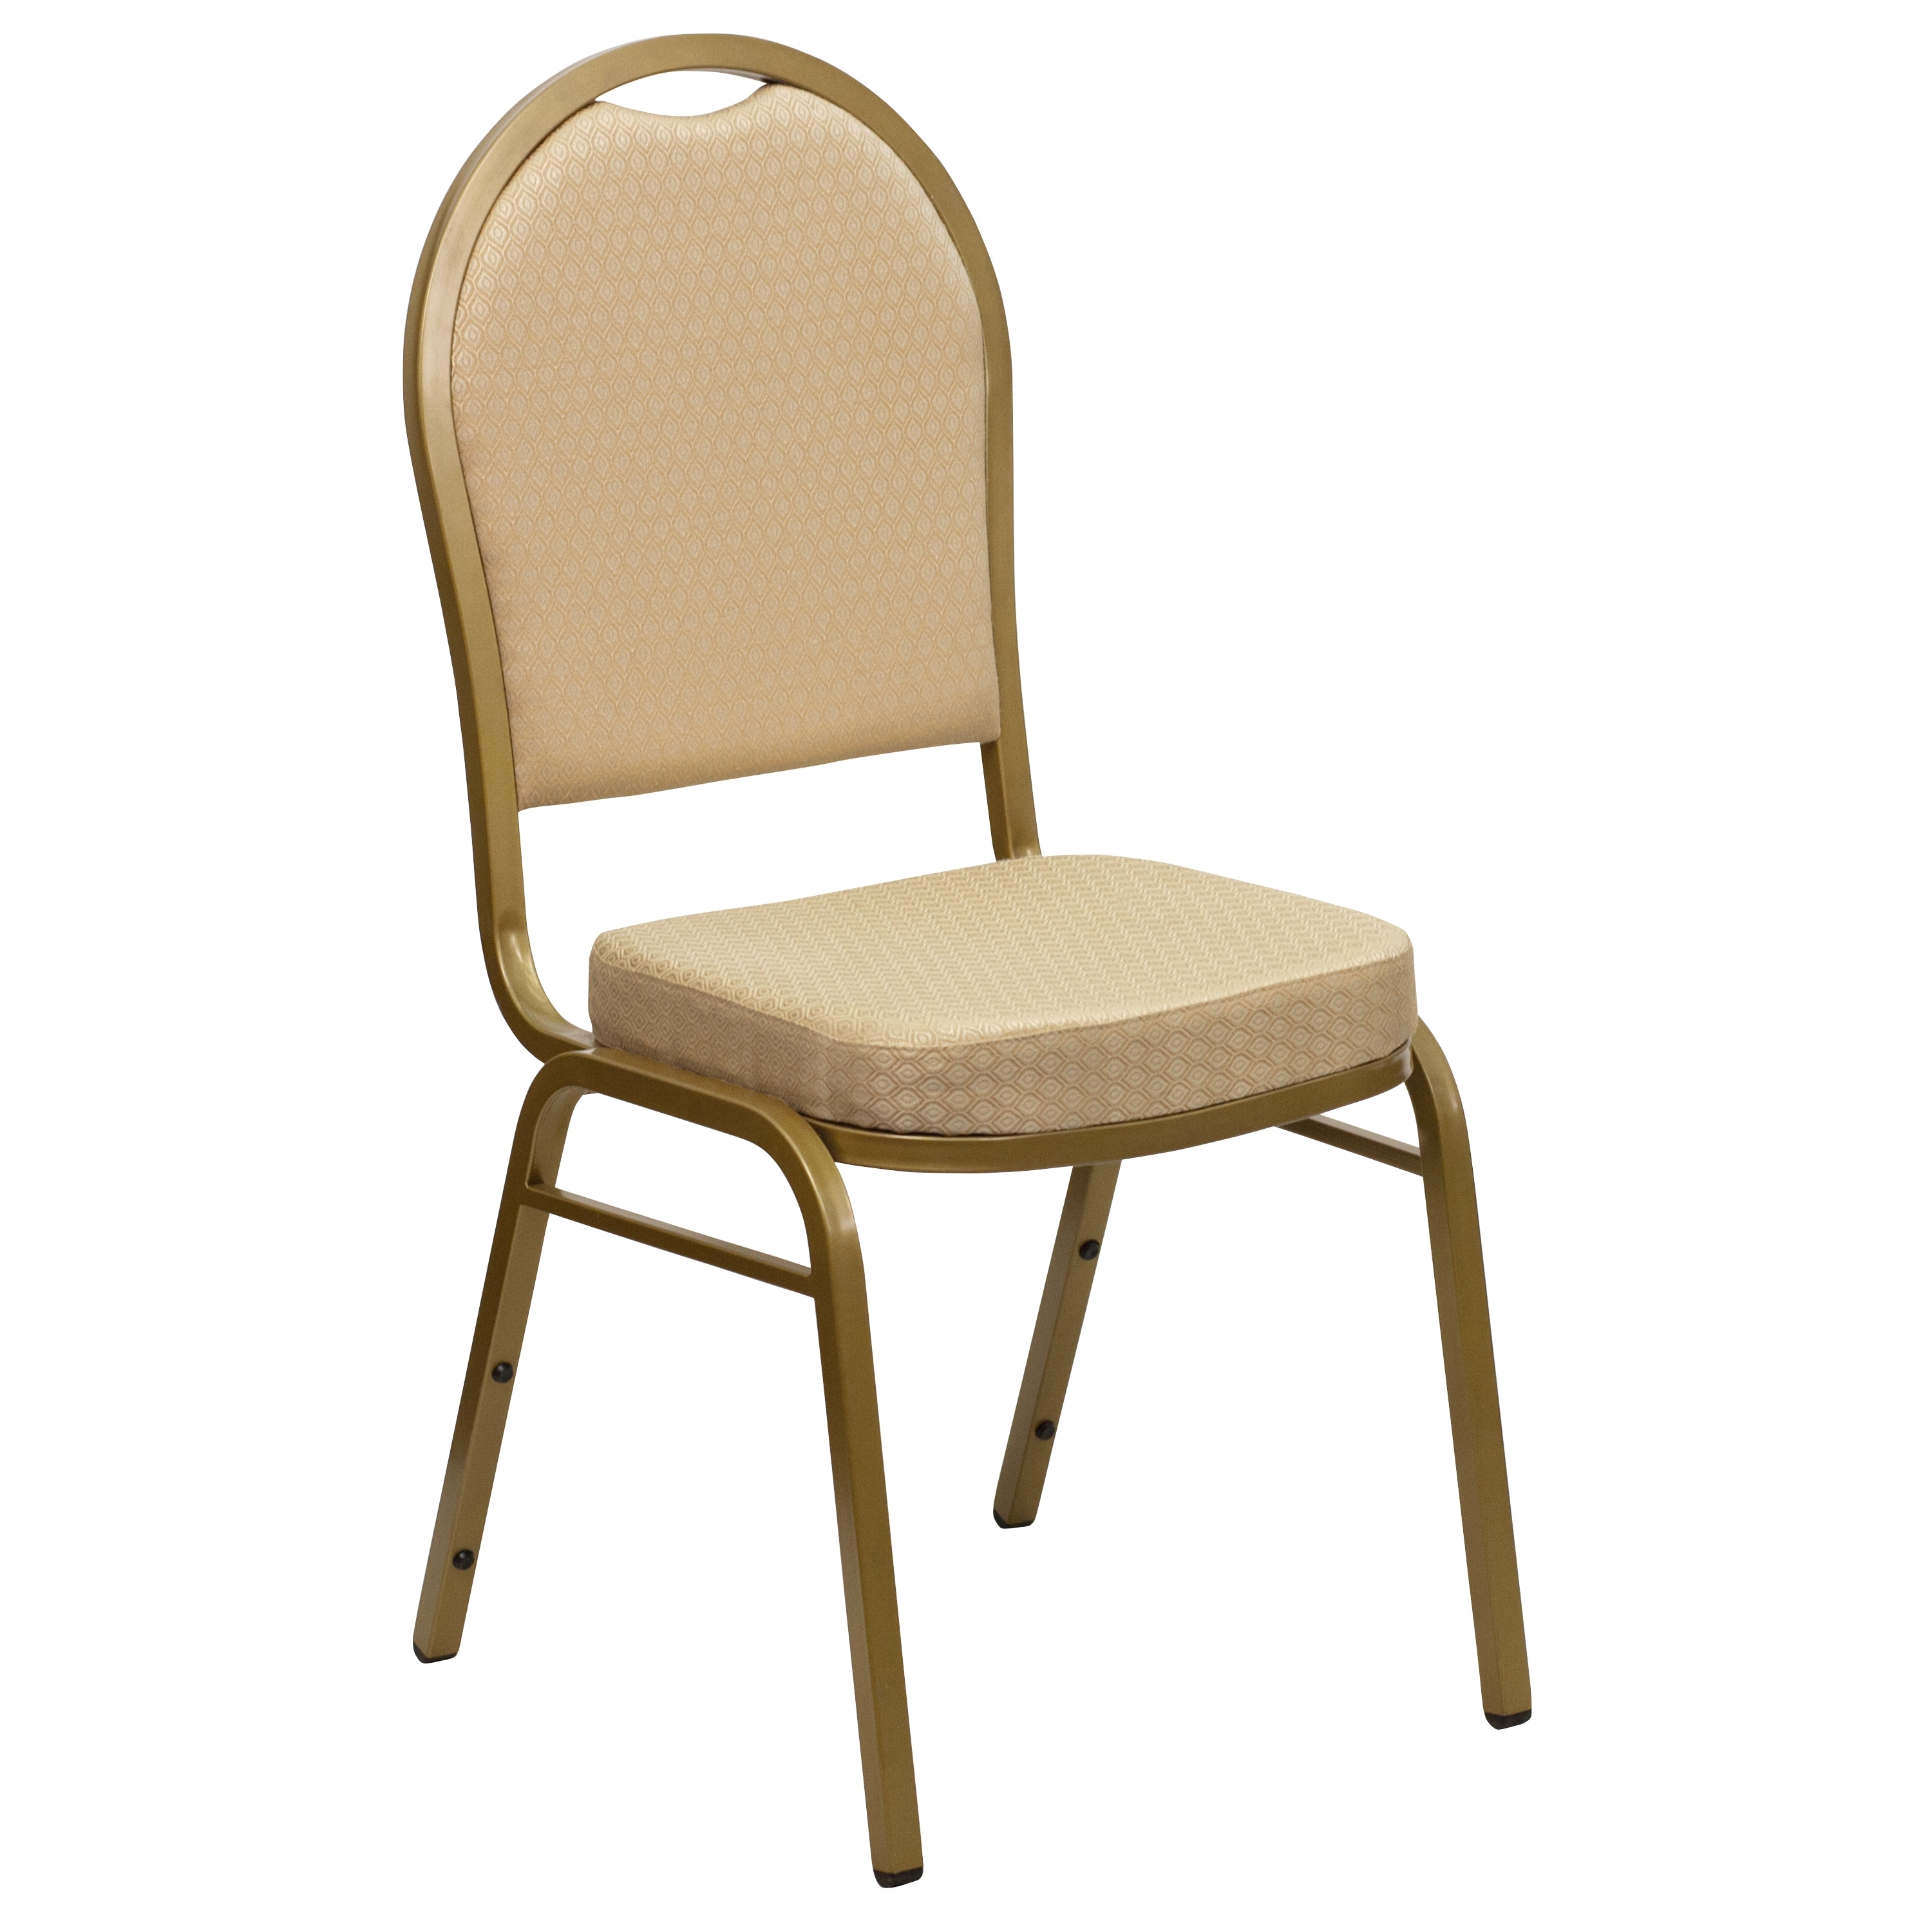 Dome Back Stacking Banquet Chair - On Sale - Bed Bath & Beyond - 10512500